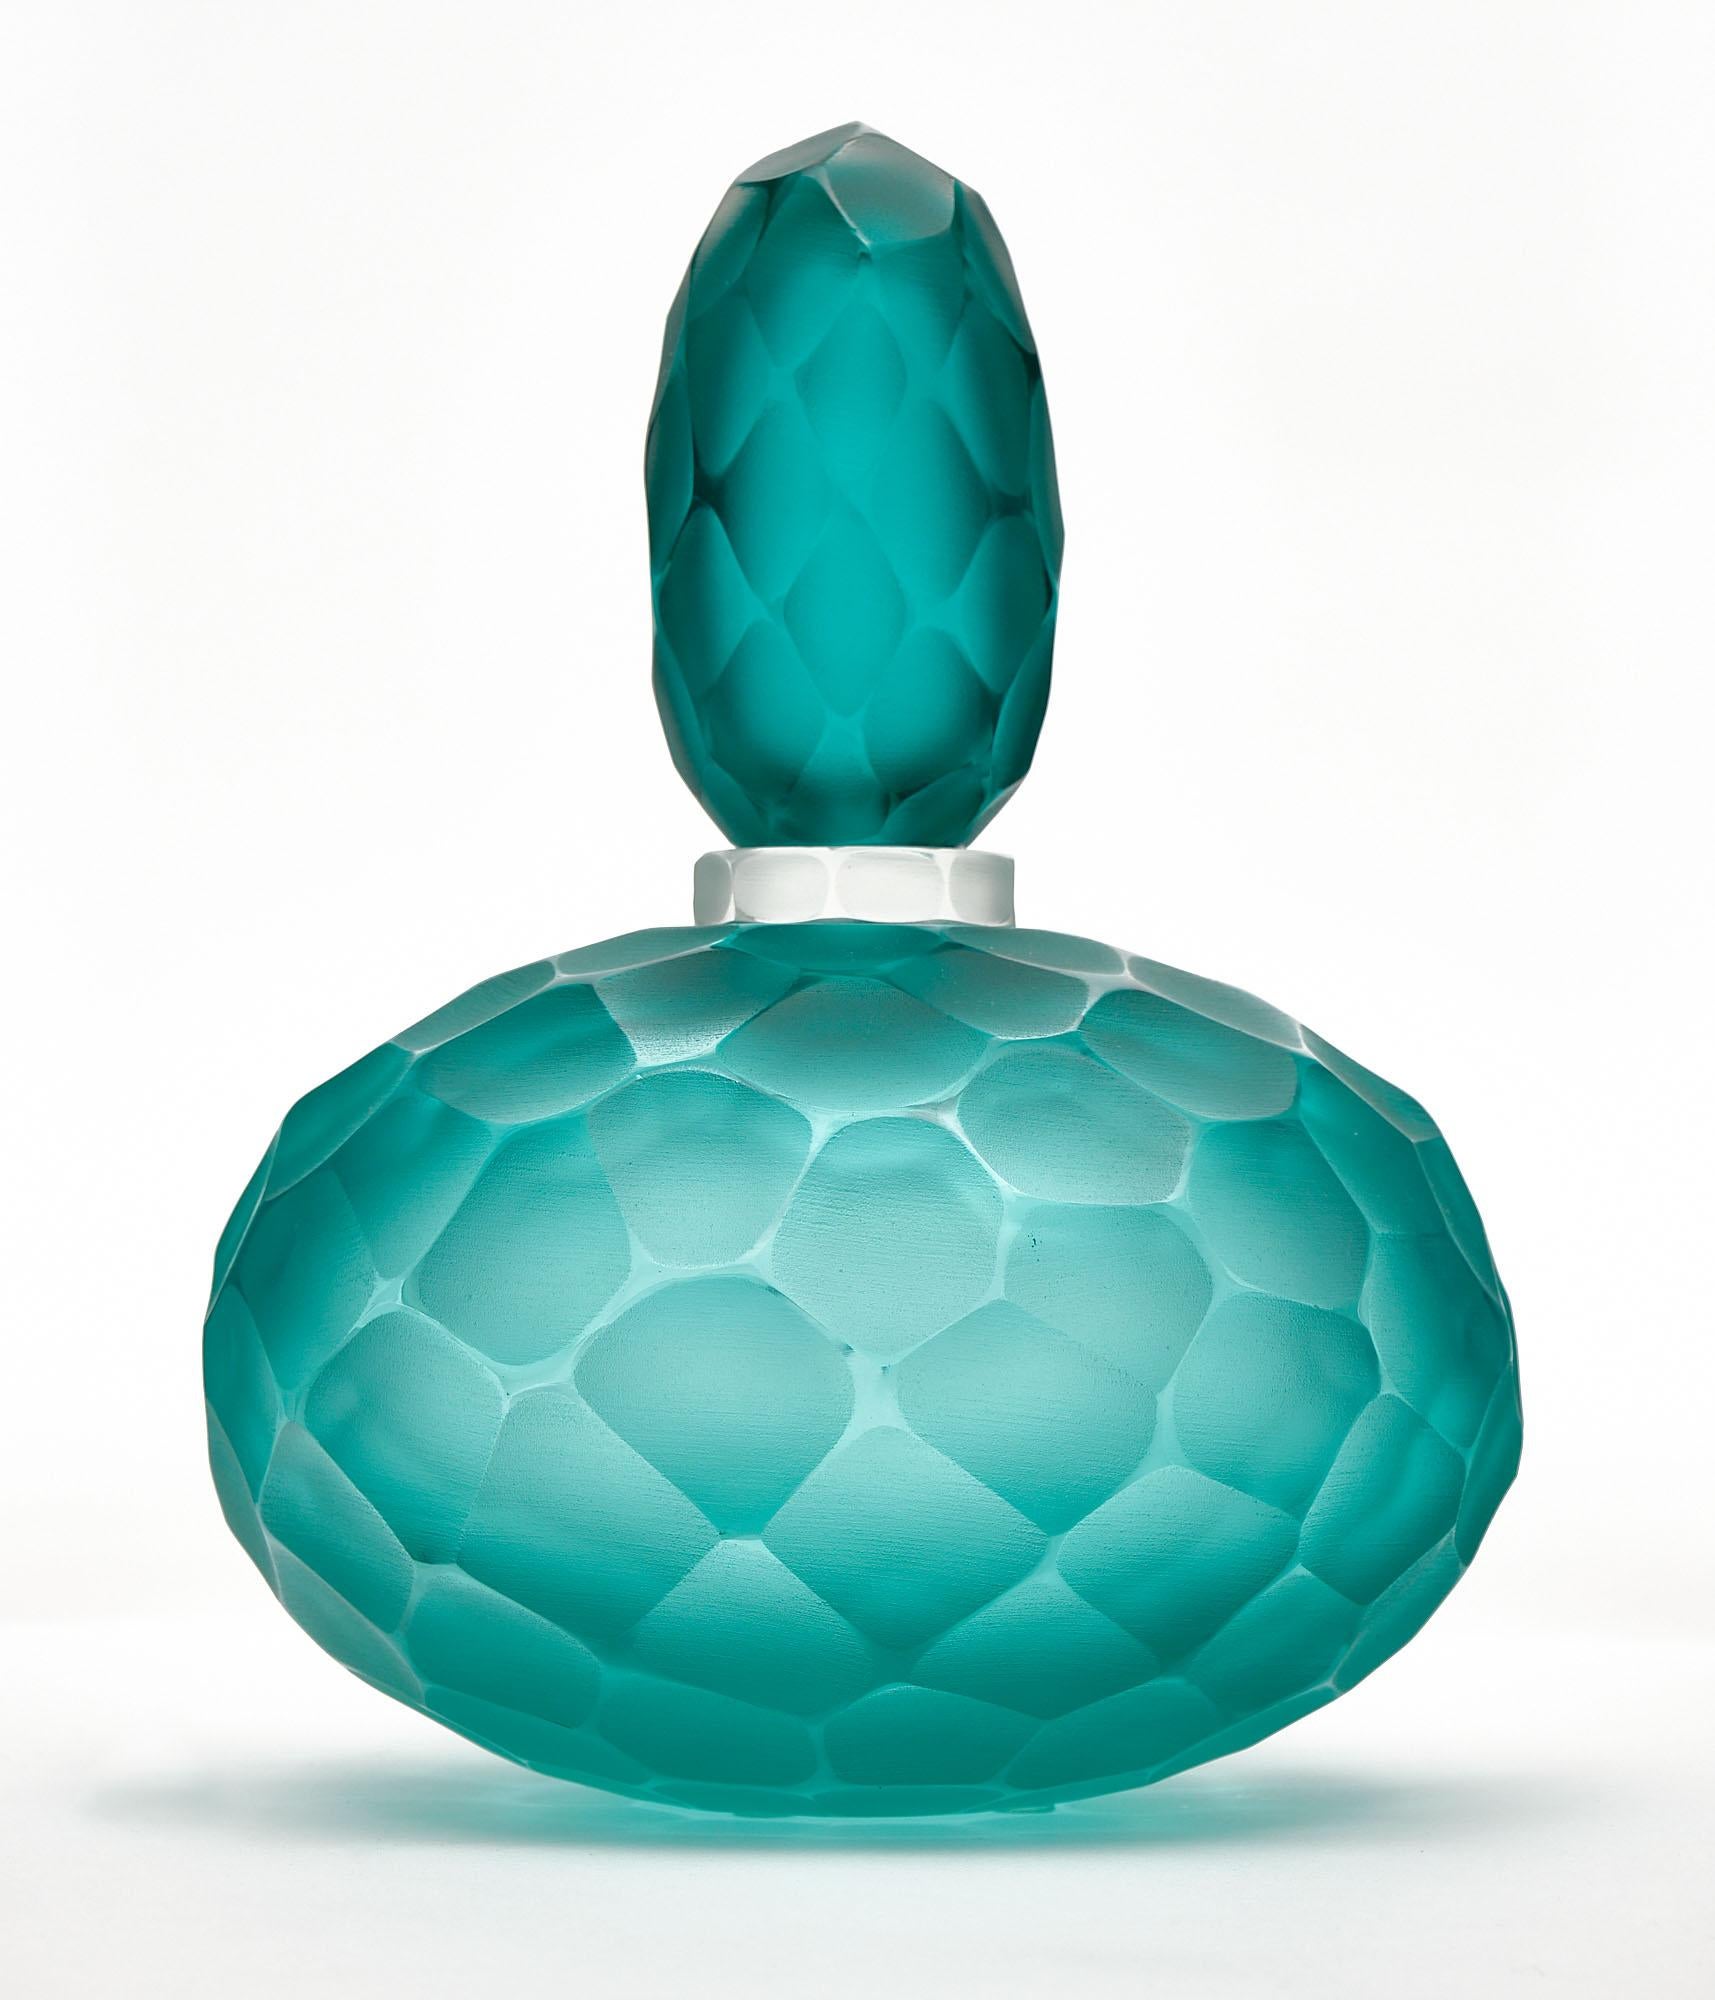 Pair of bottles made of hand-blown glass from Murano, Italy in the “Ferro Battuto” technique, attributed to Carlo Scarpa. This highly decorative pair is in a beautiful deep aqua blue color. 

Tall bottle
Height - 14”
Diameter - 6.5”

Short